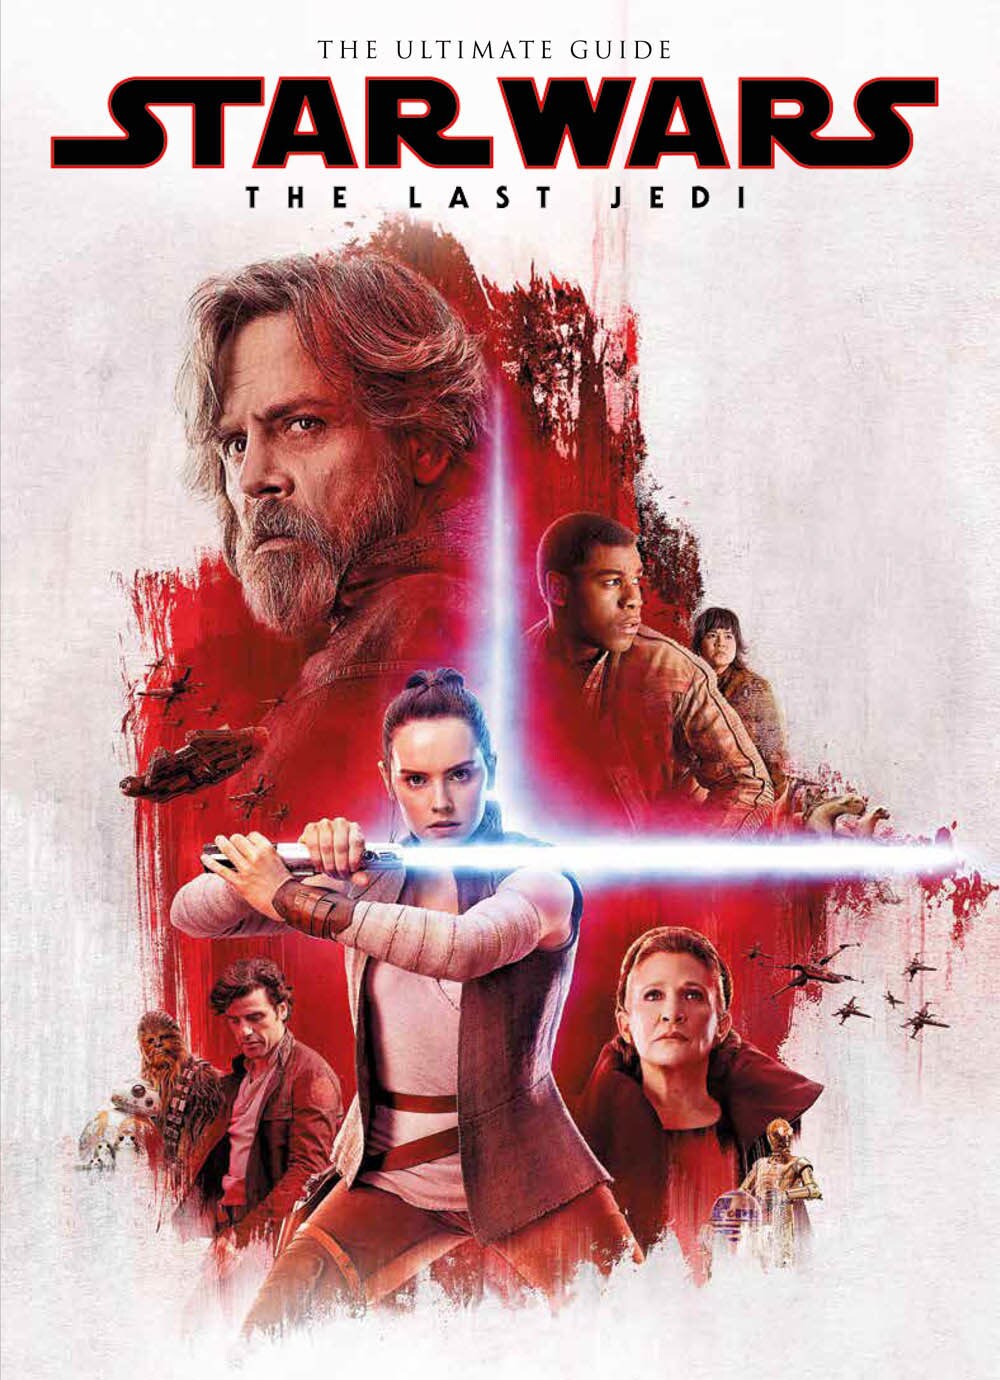 The cover of The Ultimate Guide to Star Wars: The Last Jedi.